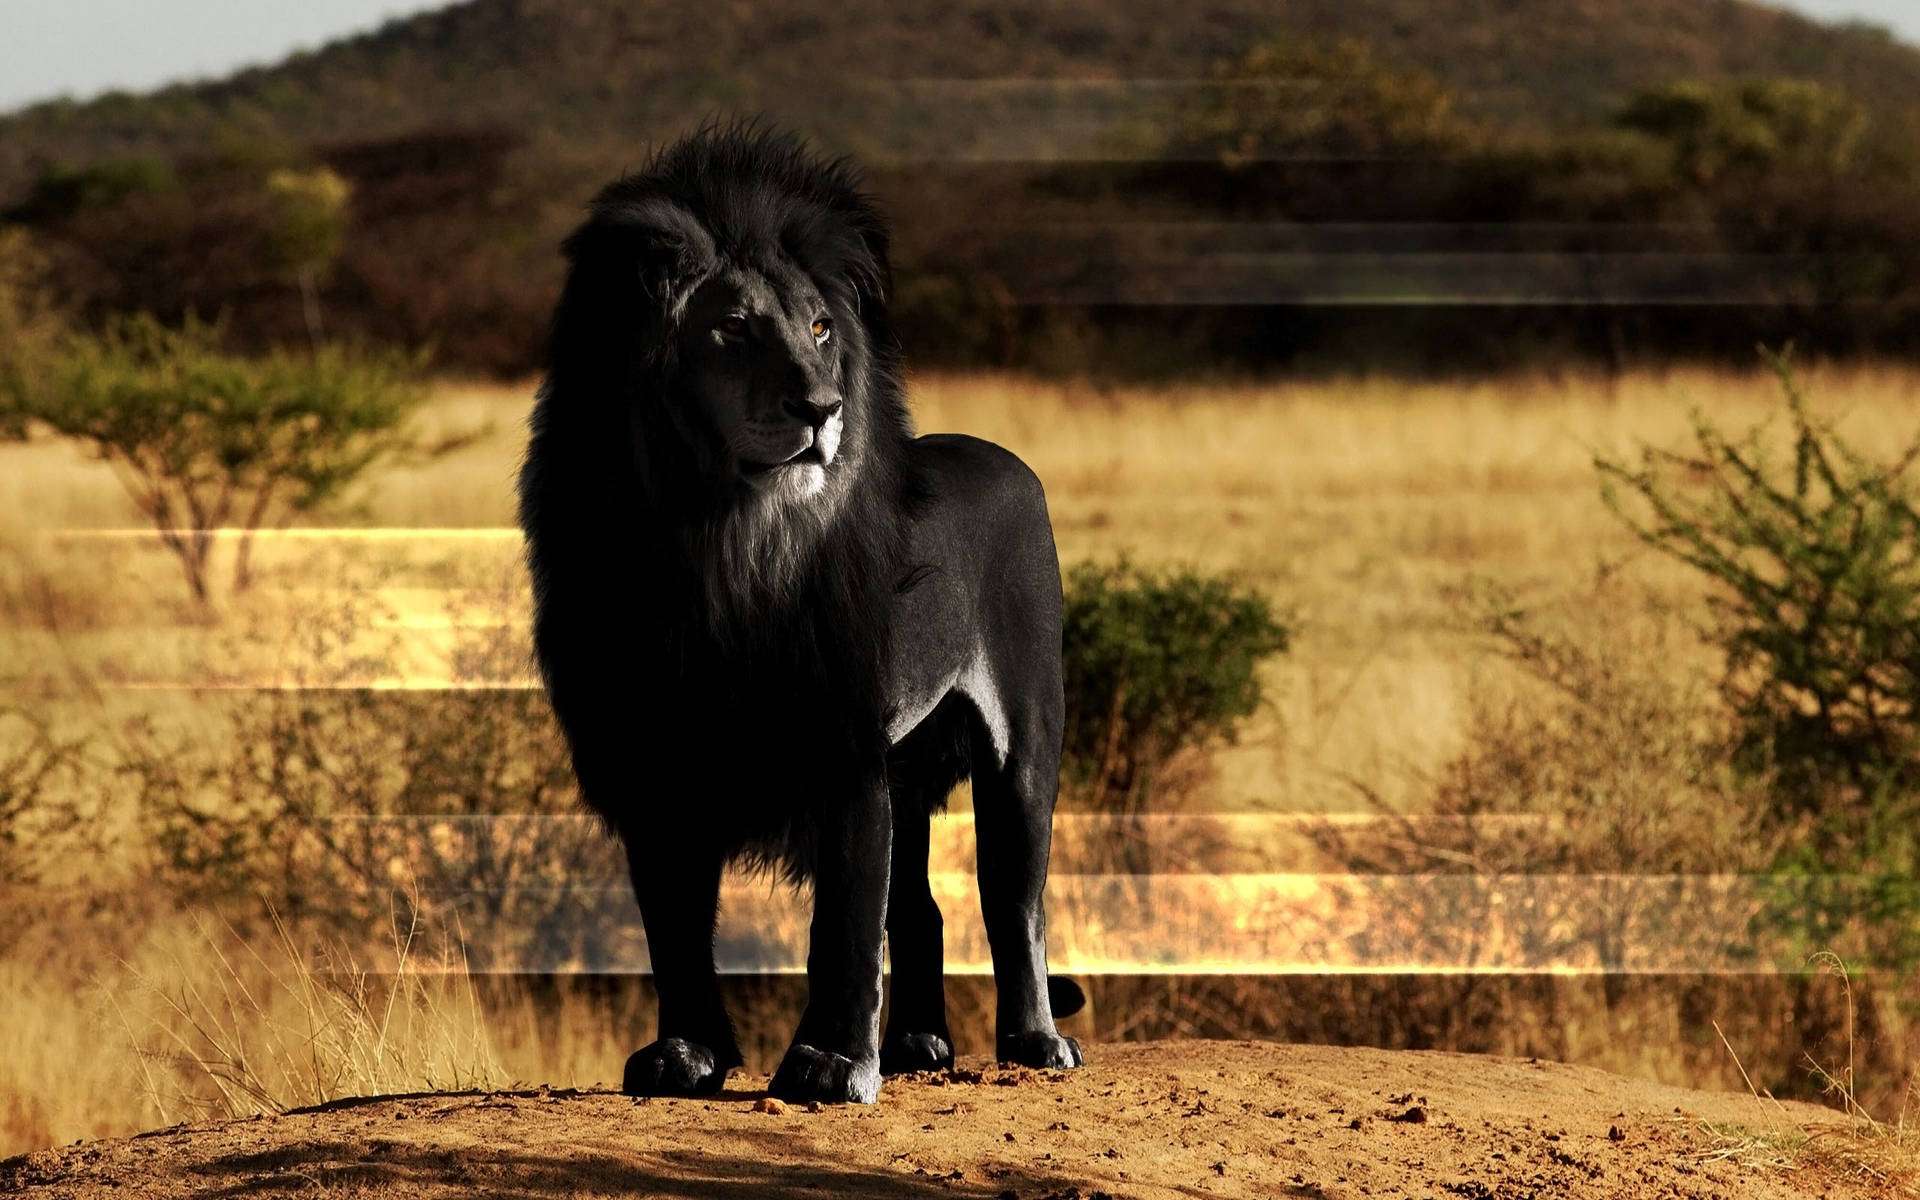 2560X1600 Lion Wallpaper and Background